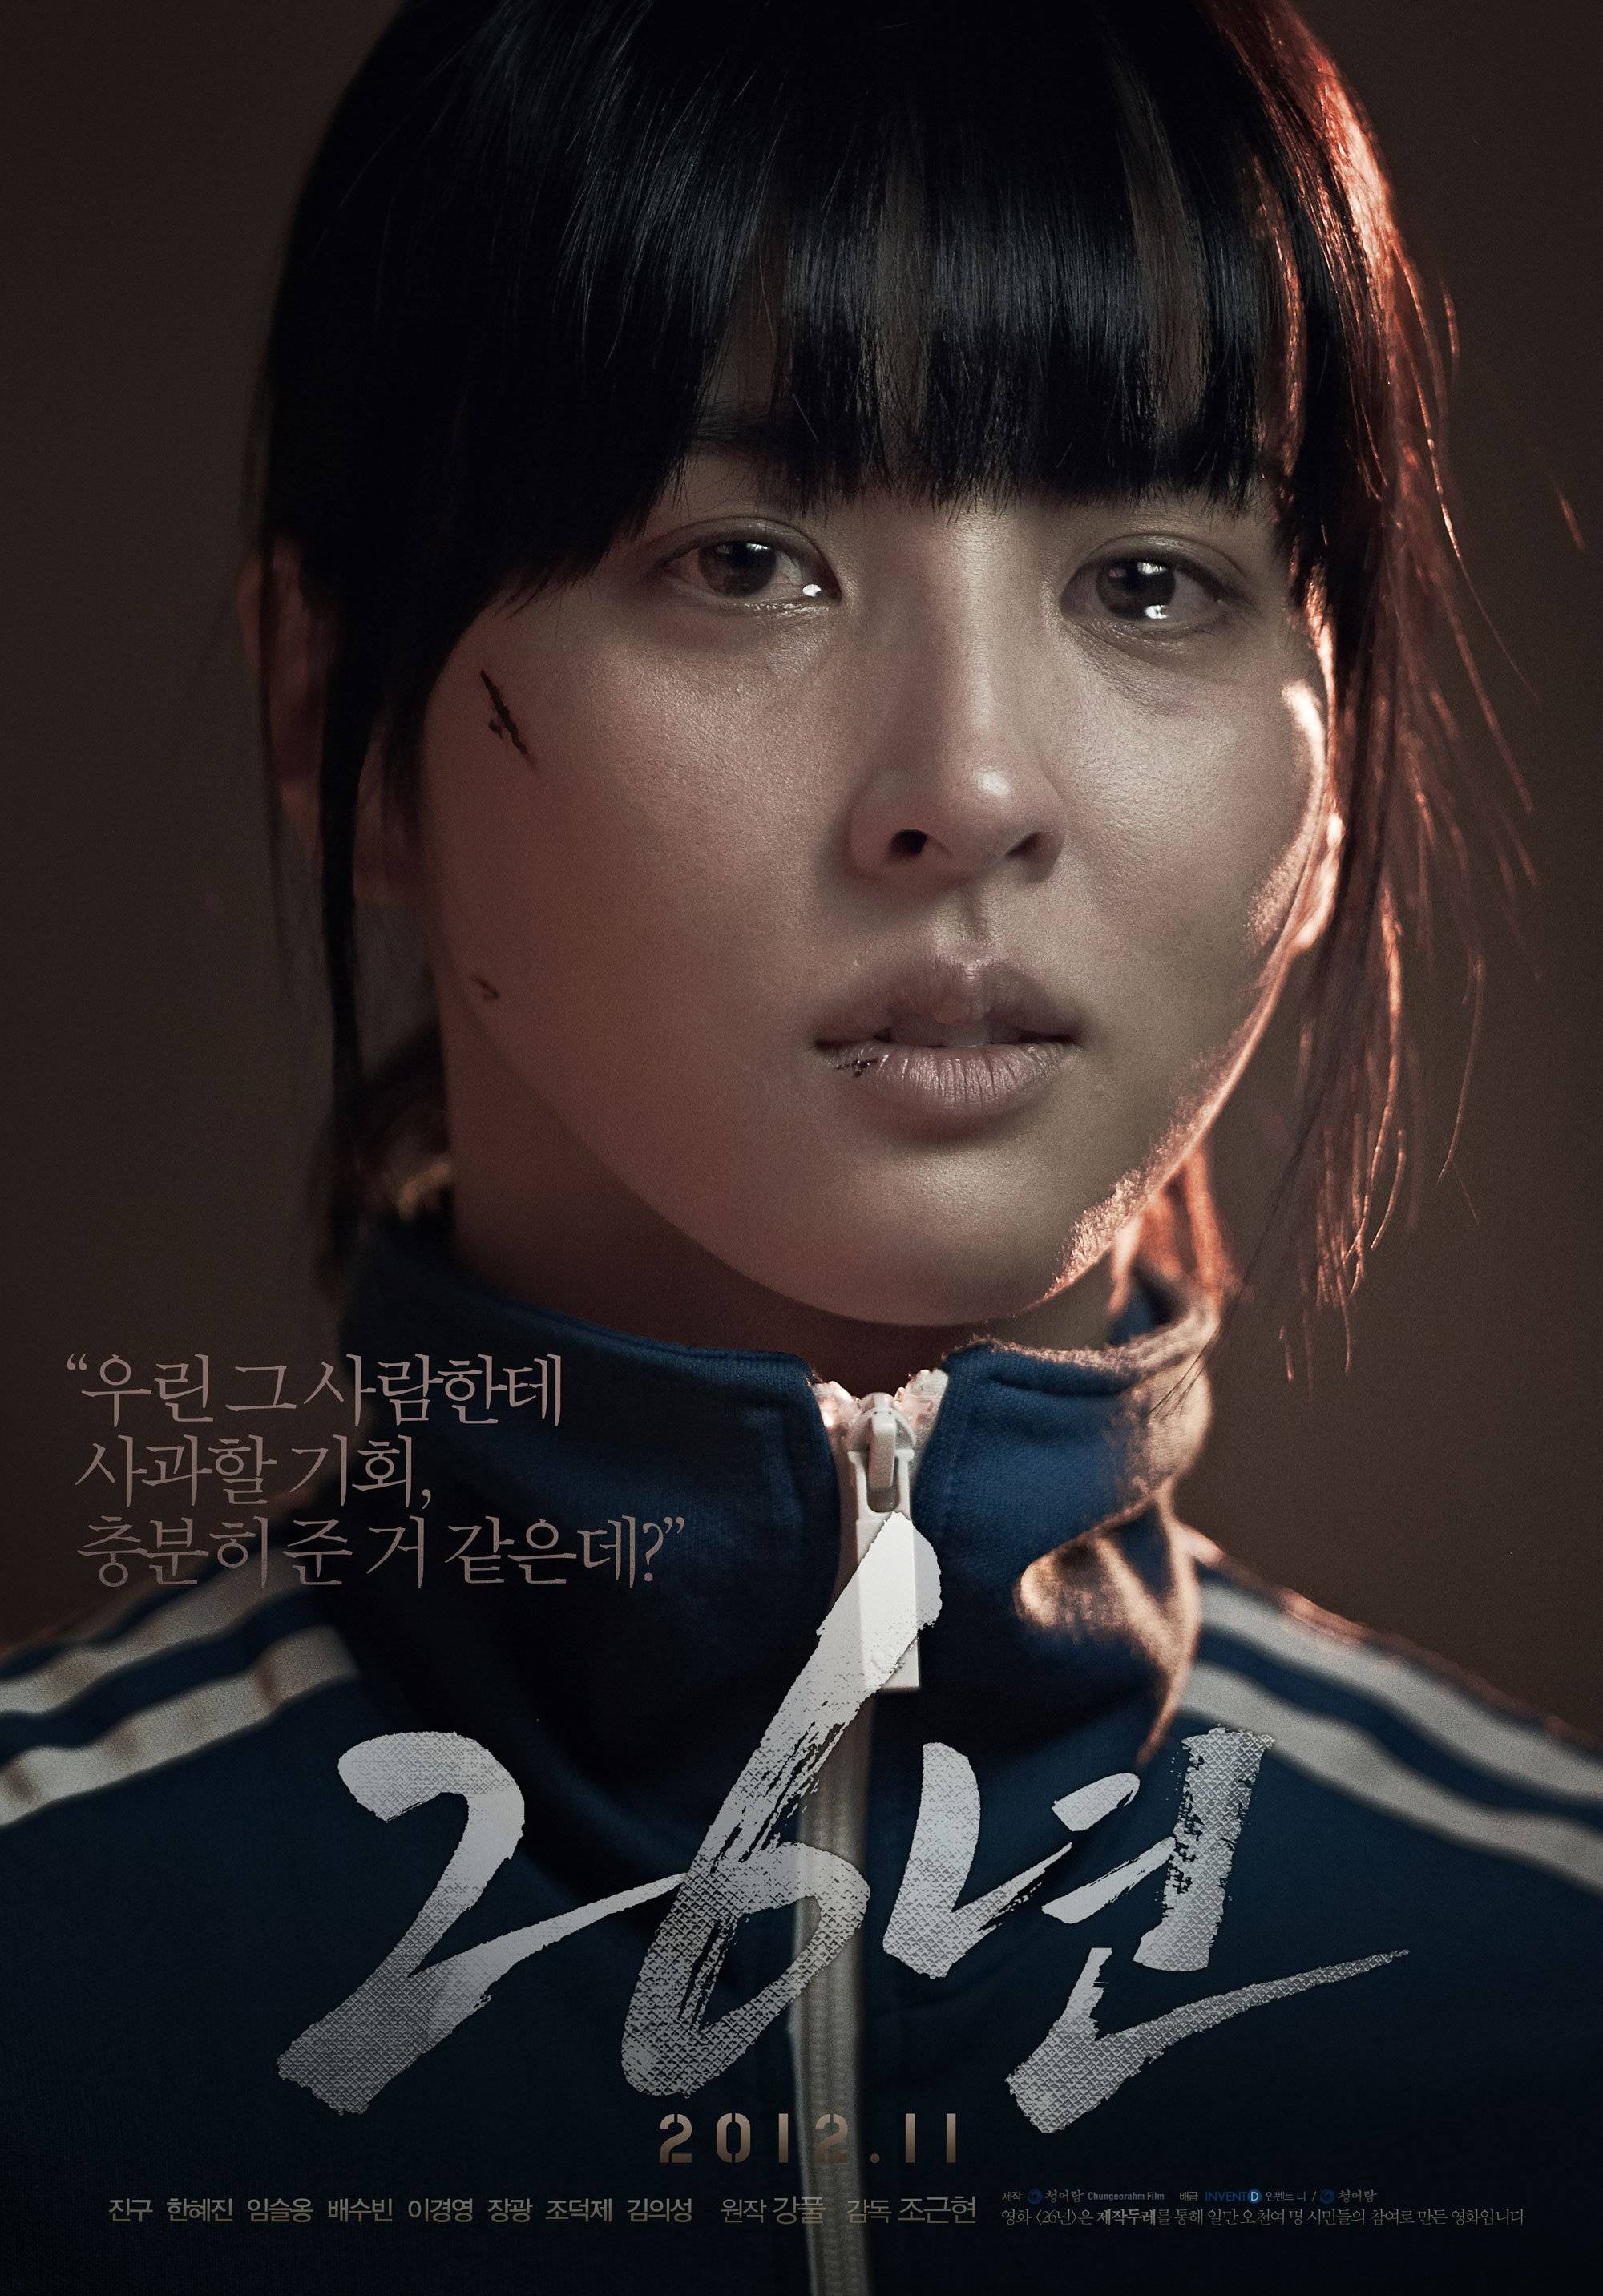 Added new posters for the Korean movie "26 Years" HanCinema